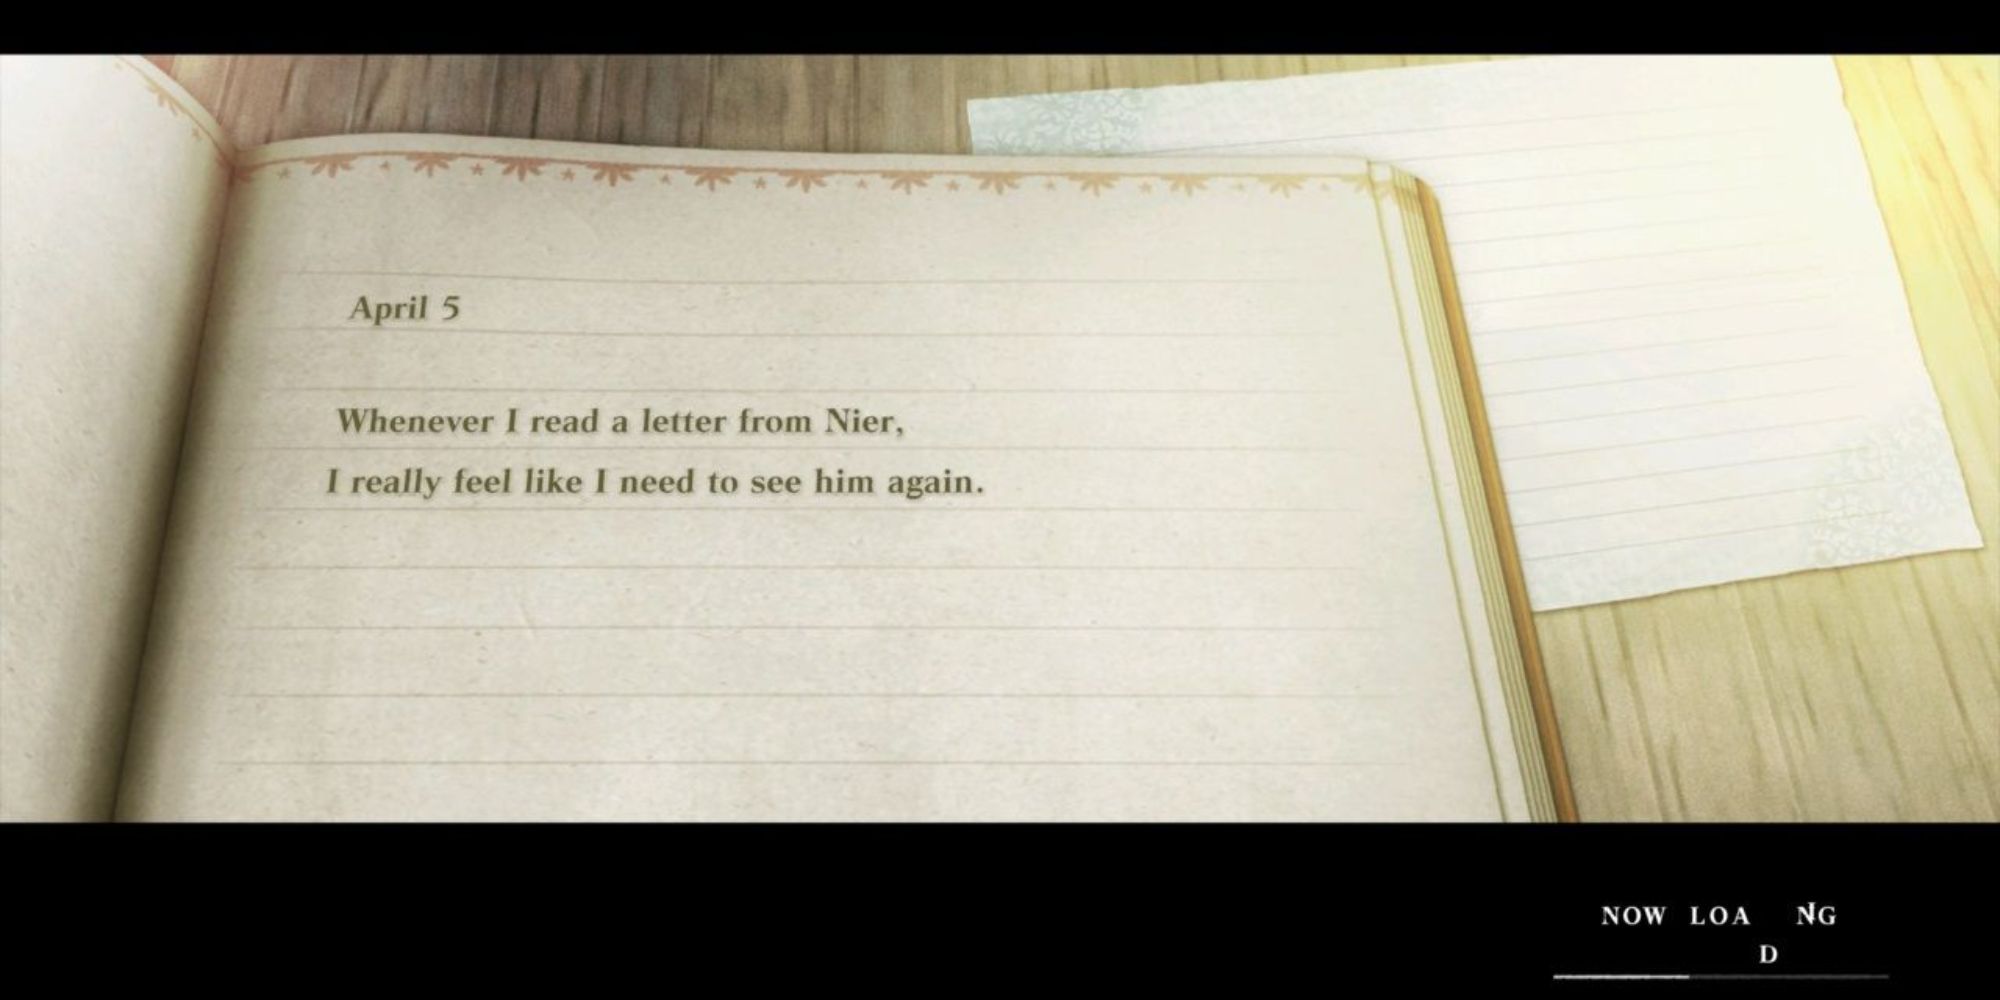 Nier Replicant Yonah's diary mentioning Nier's letters